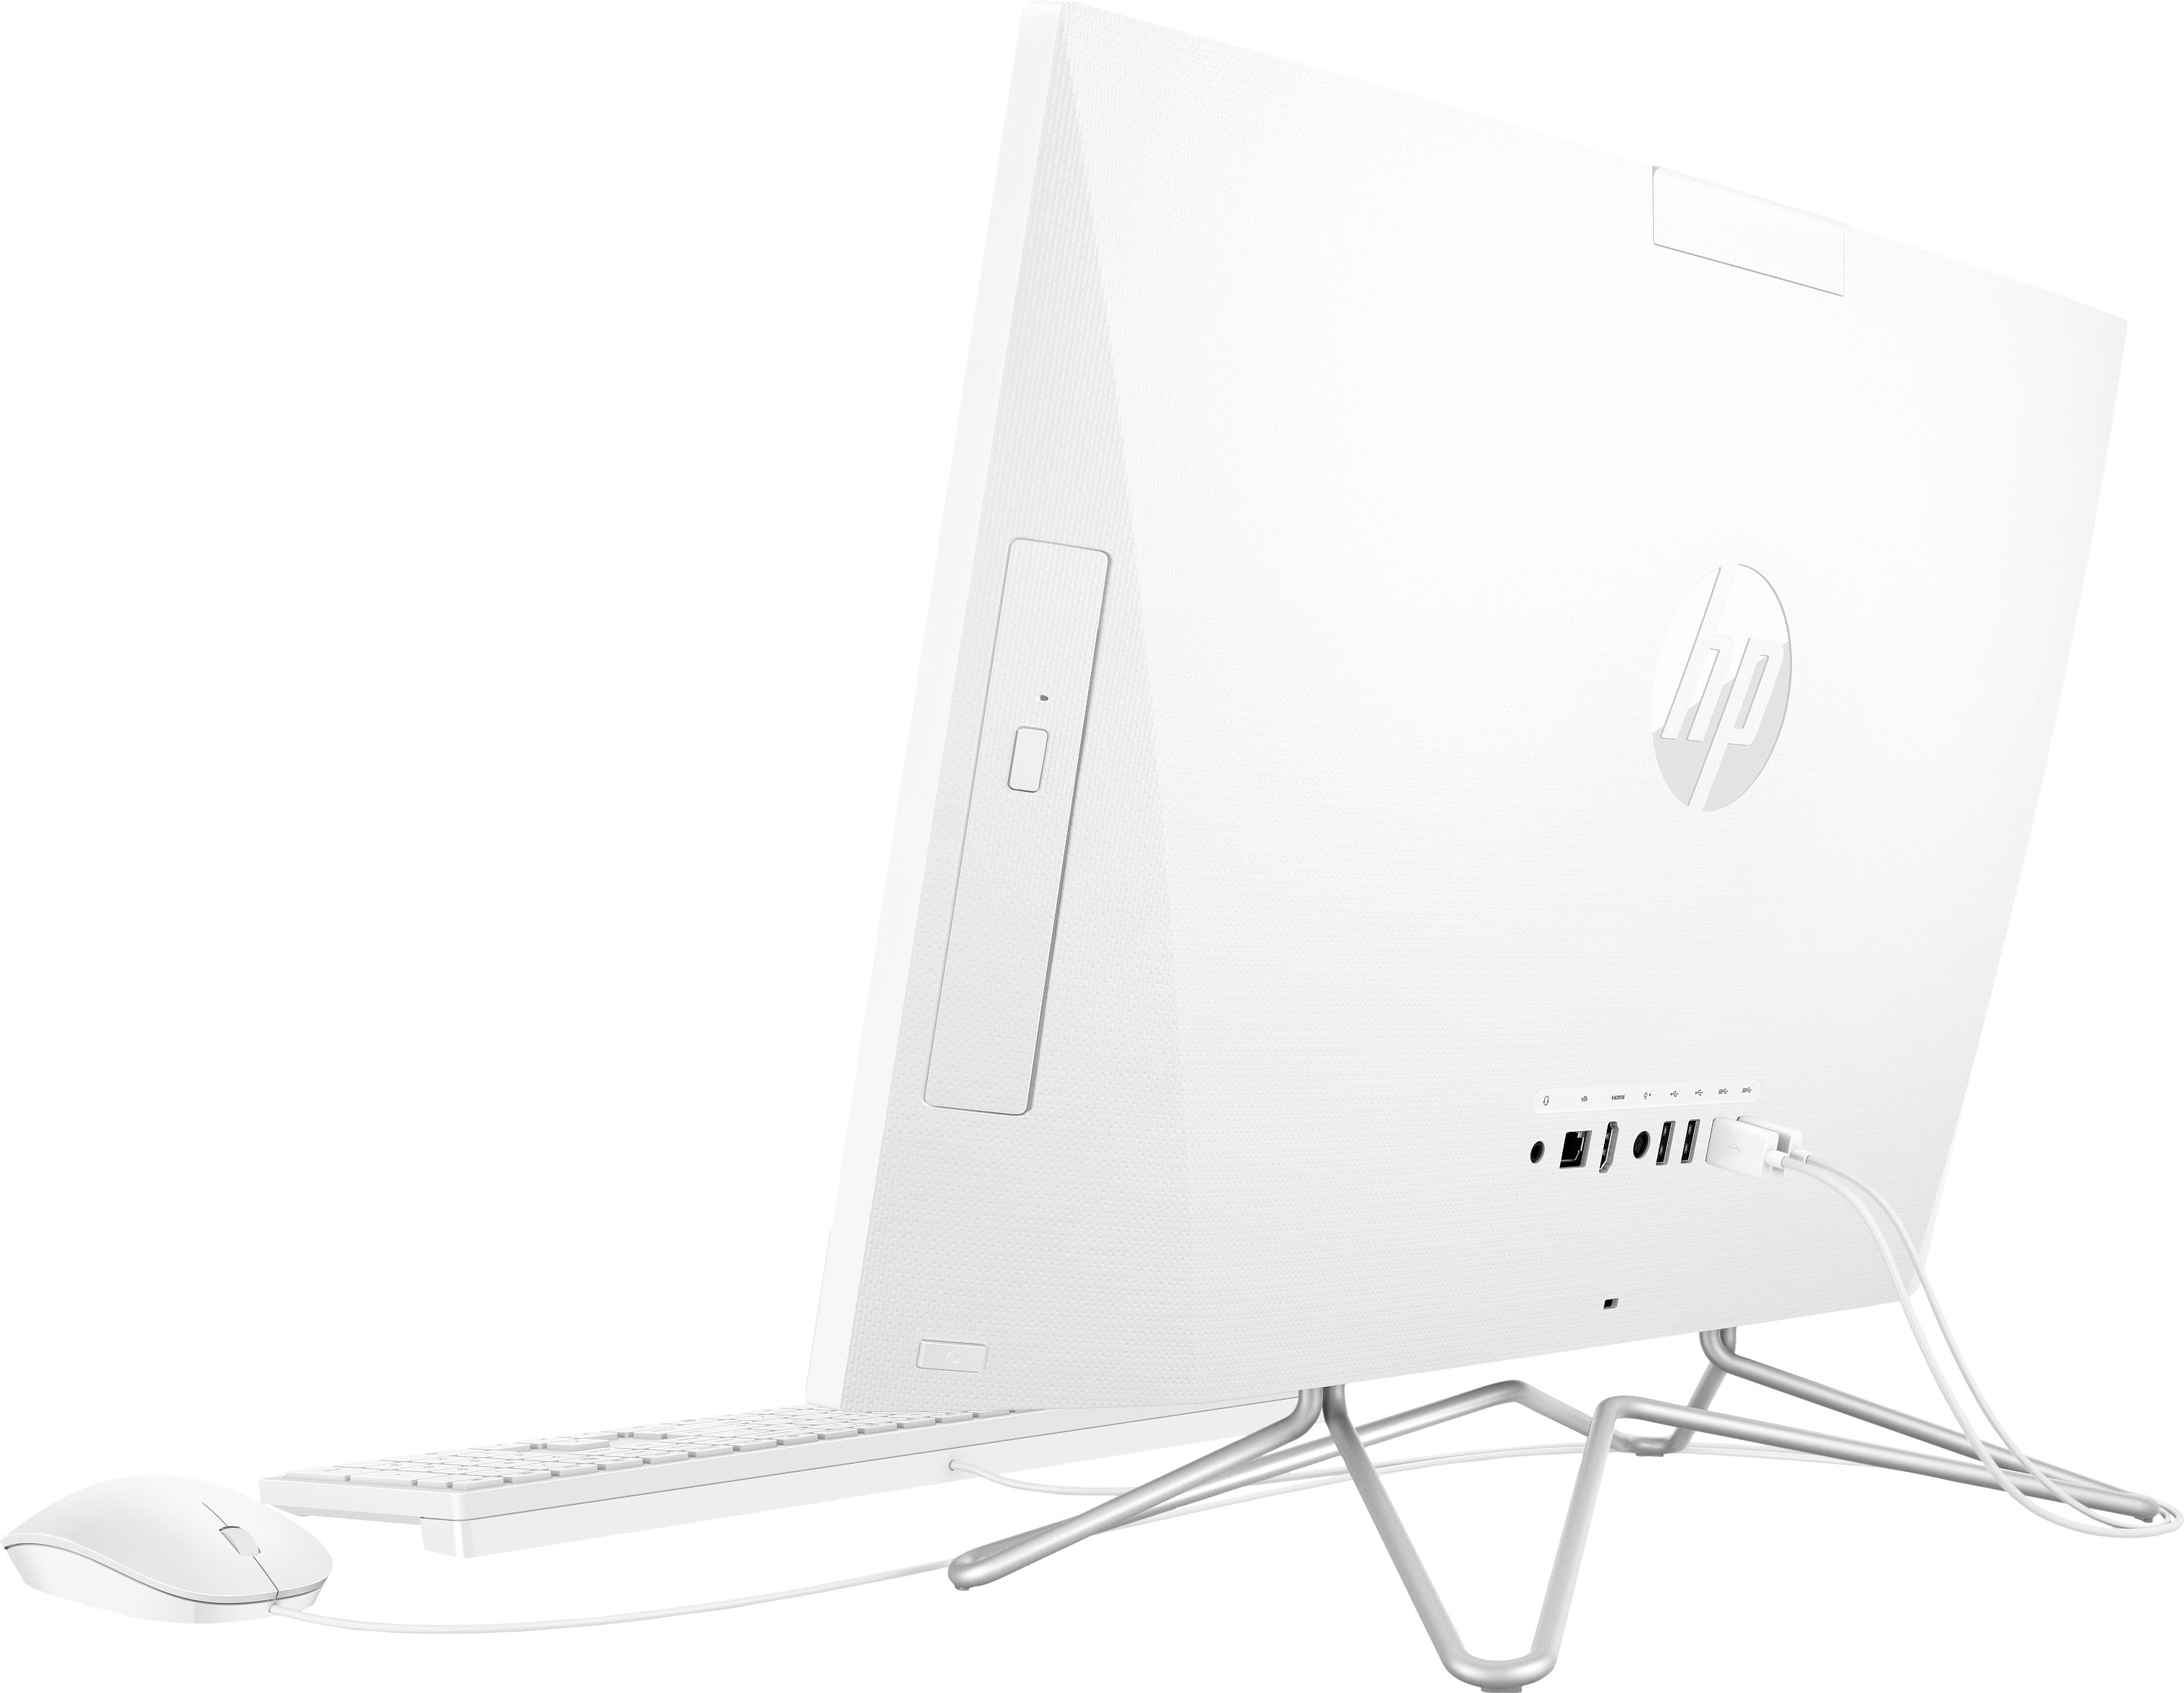 HP 23.8 Full HD Touch-Screen All-in-One Intel Core i3 8GB Memory 512GB SSD  Starry White 24-cb1124 - Best Buy